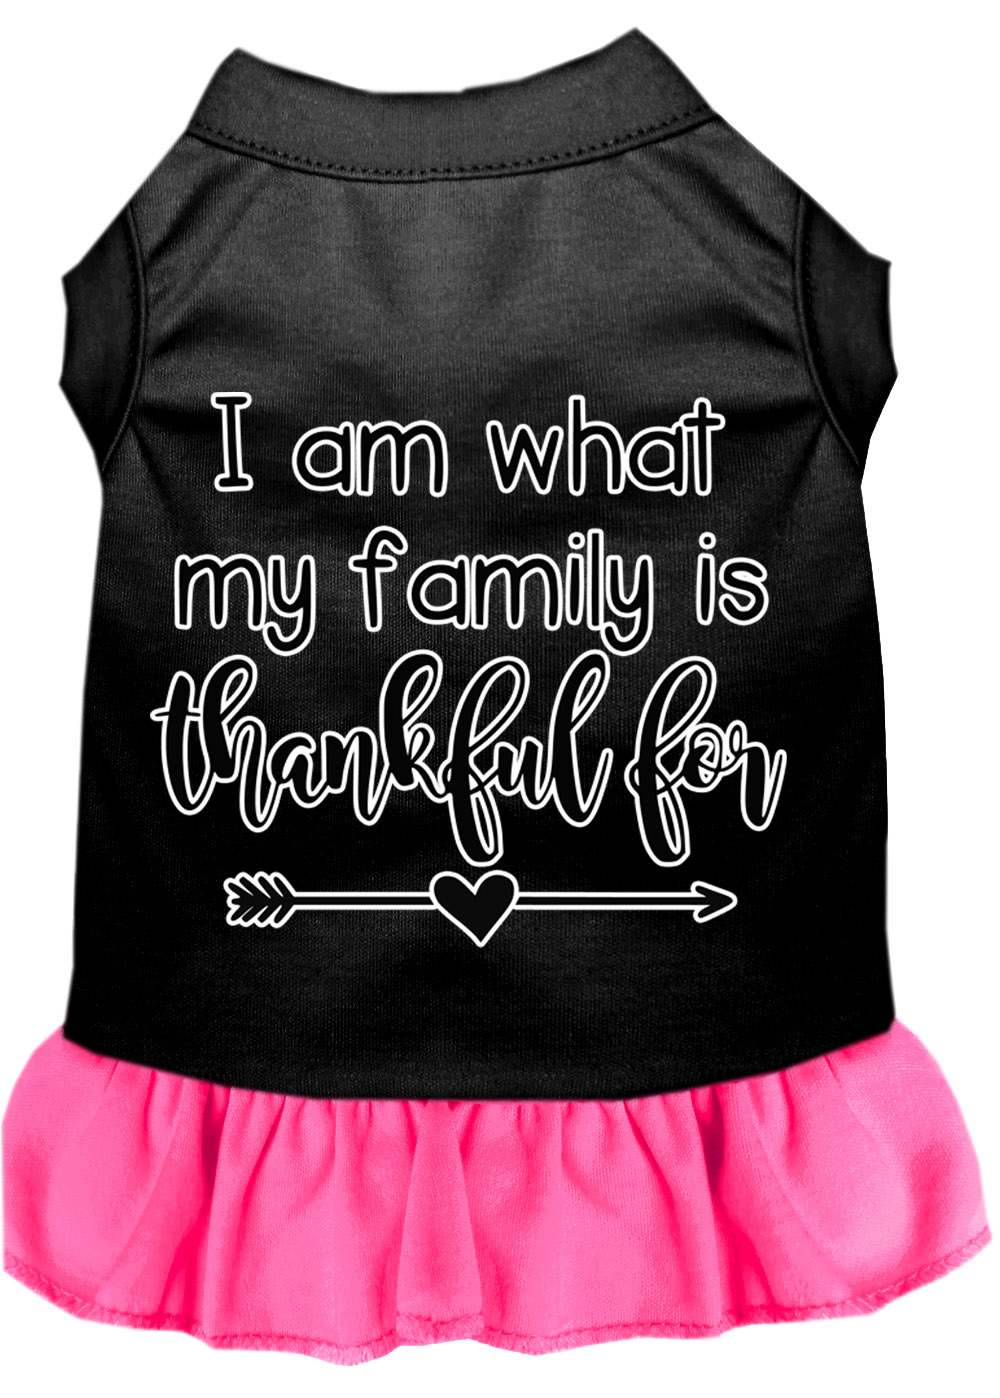 I Am What My Family is Thankful For Screen Print Dog Dress Black with Bright Pink XL